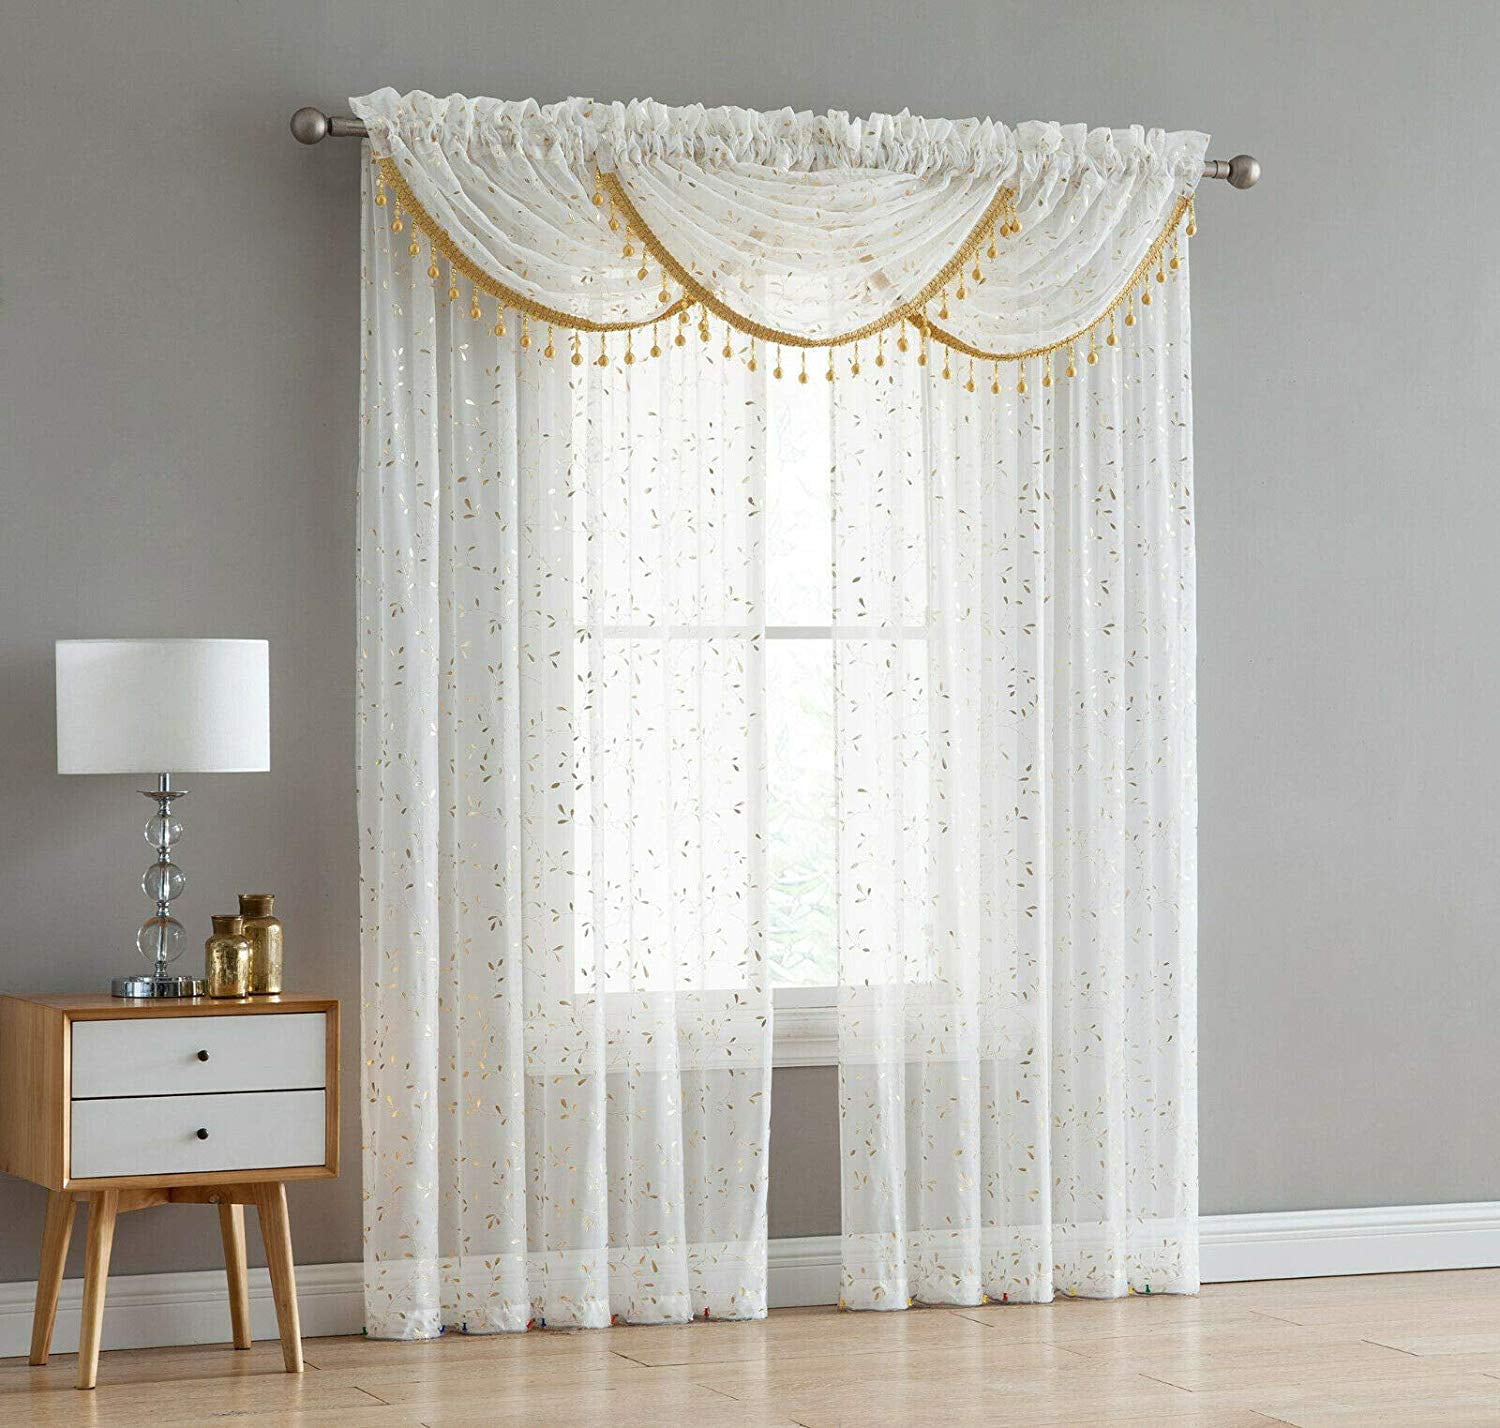 Adeline 5 Piece Sheer Curtain Set with Beaded Austrian Valances and ...